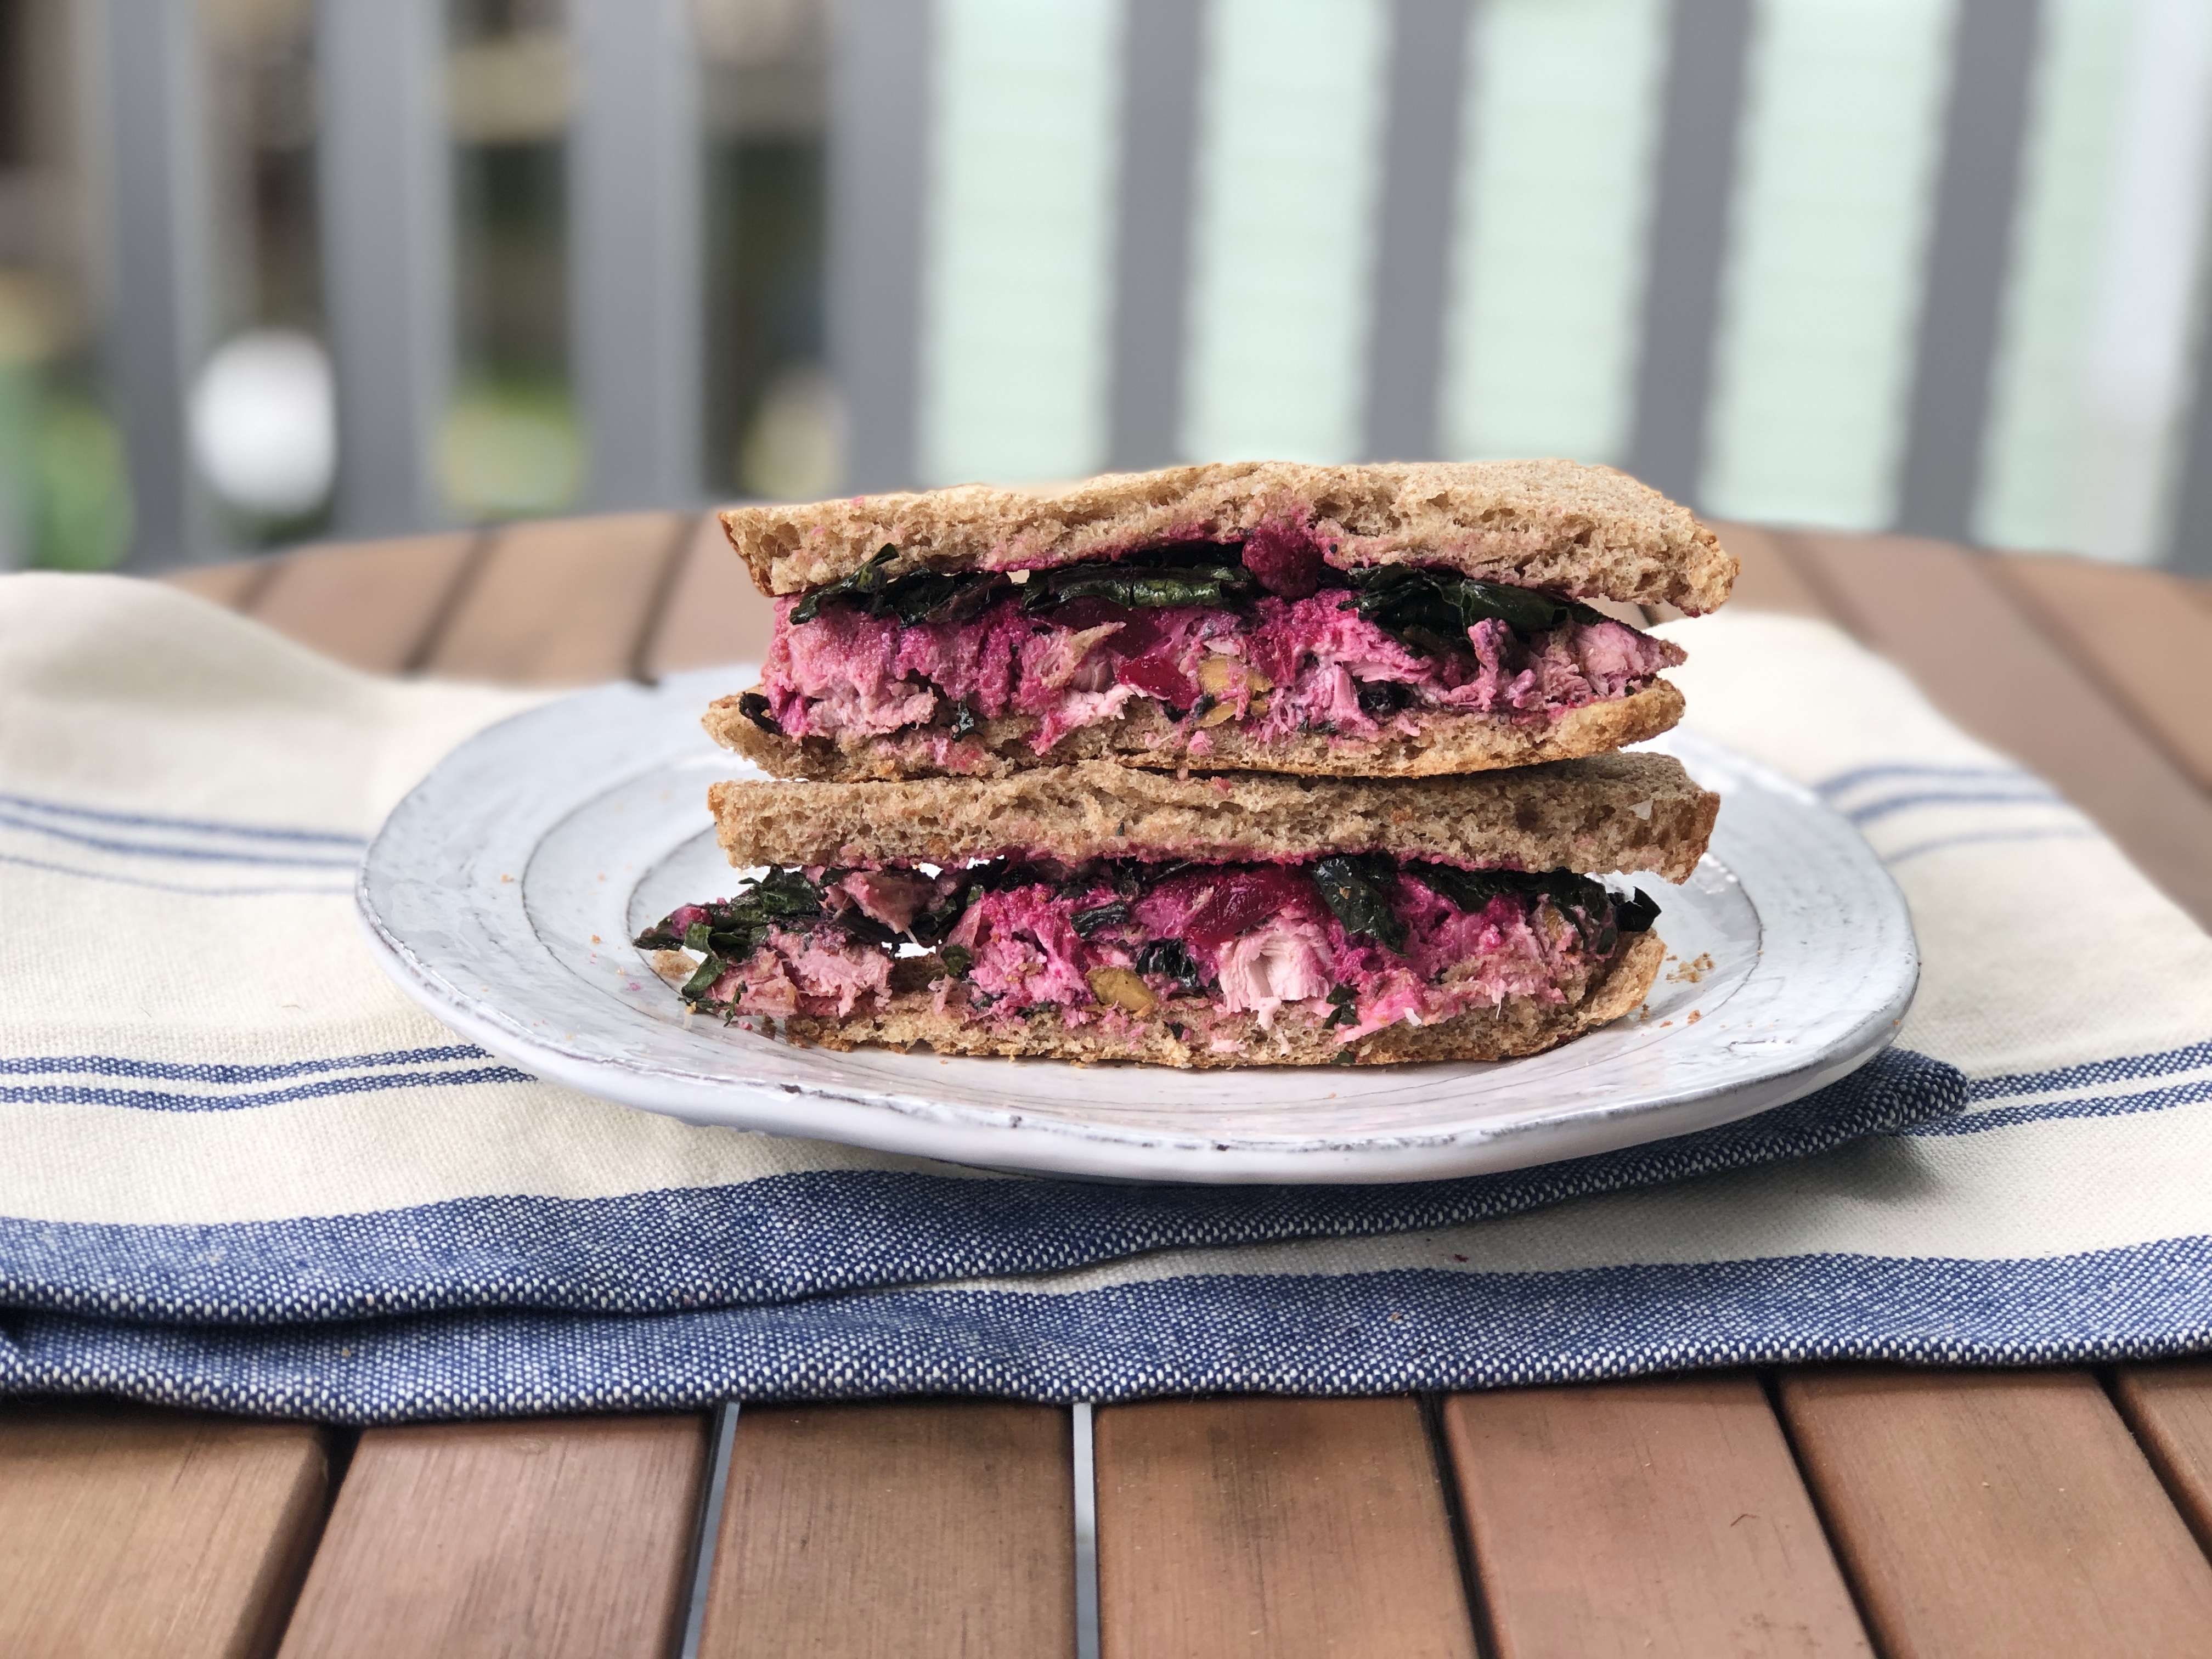 sandwich with beet filling and whole grain bread on a plate outdoors